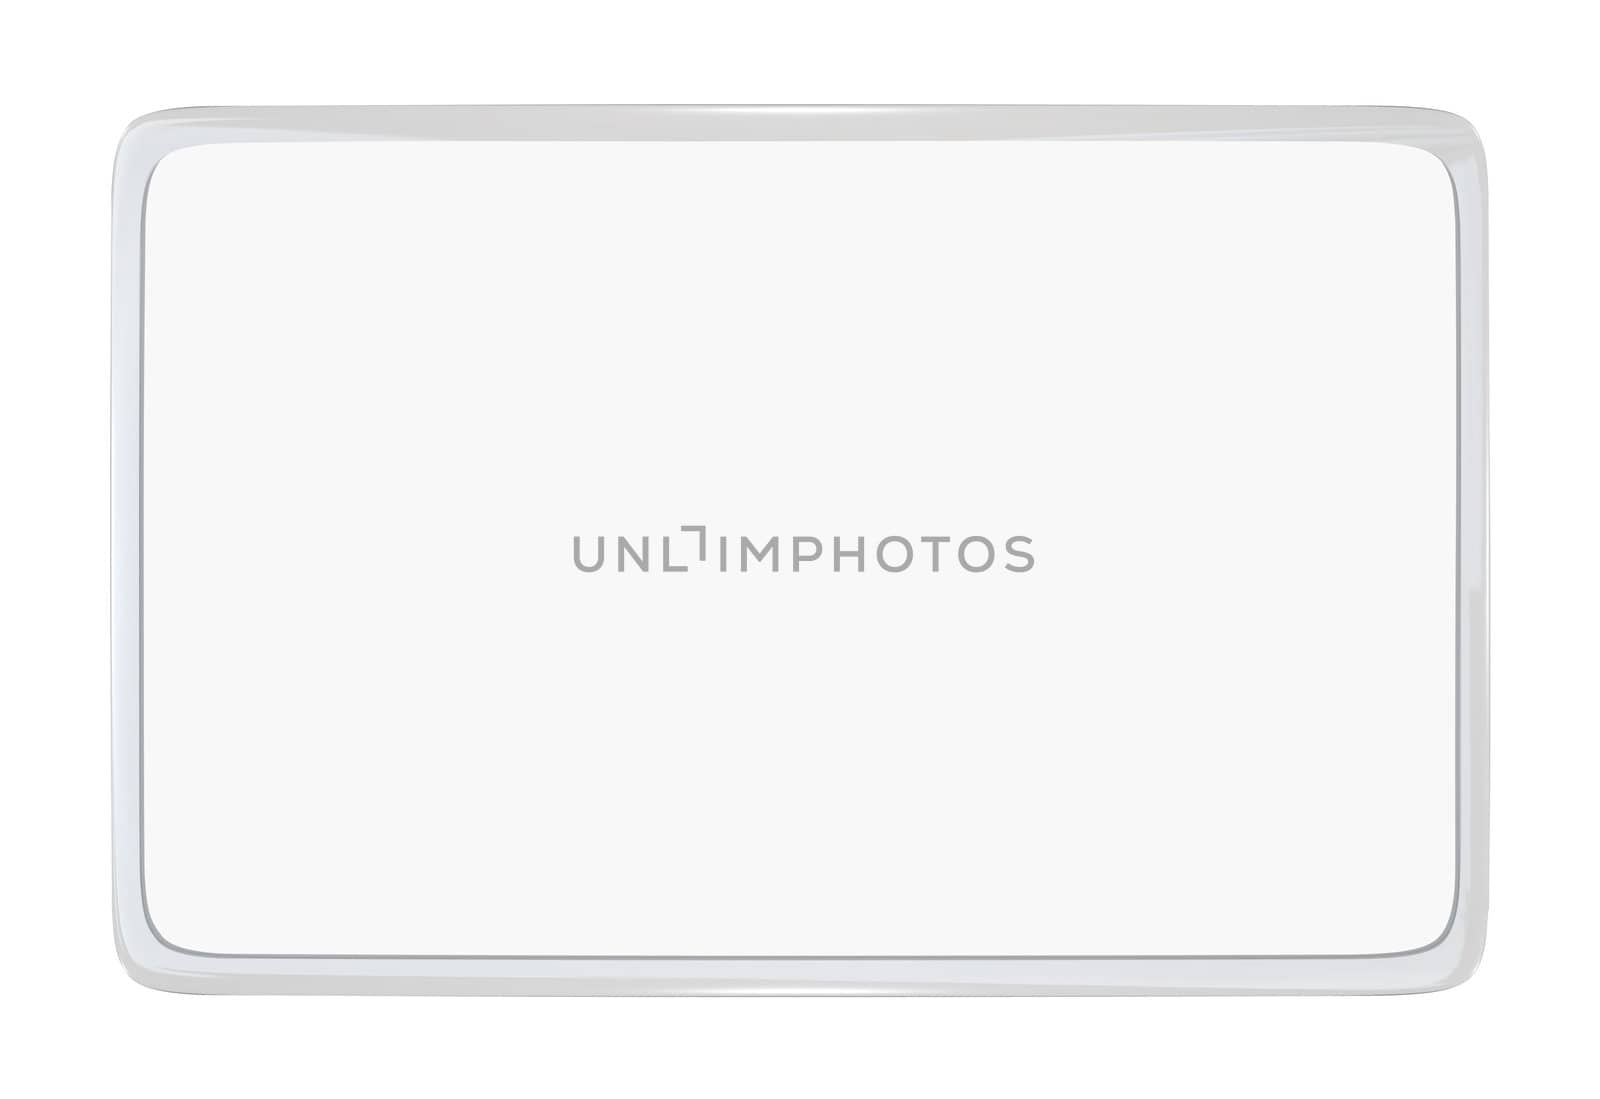 Blank Laminated Card - Place Your Own License or Identification  by iQoncept